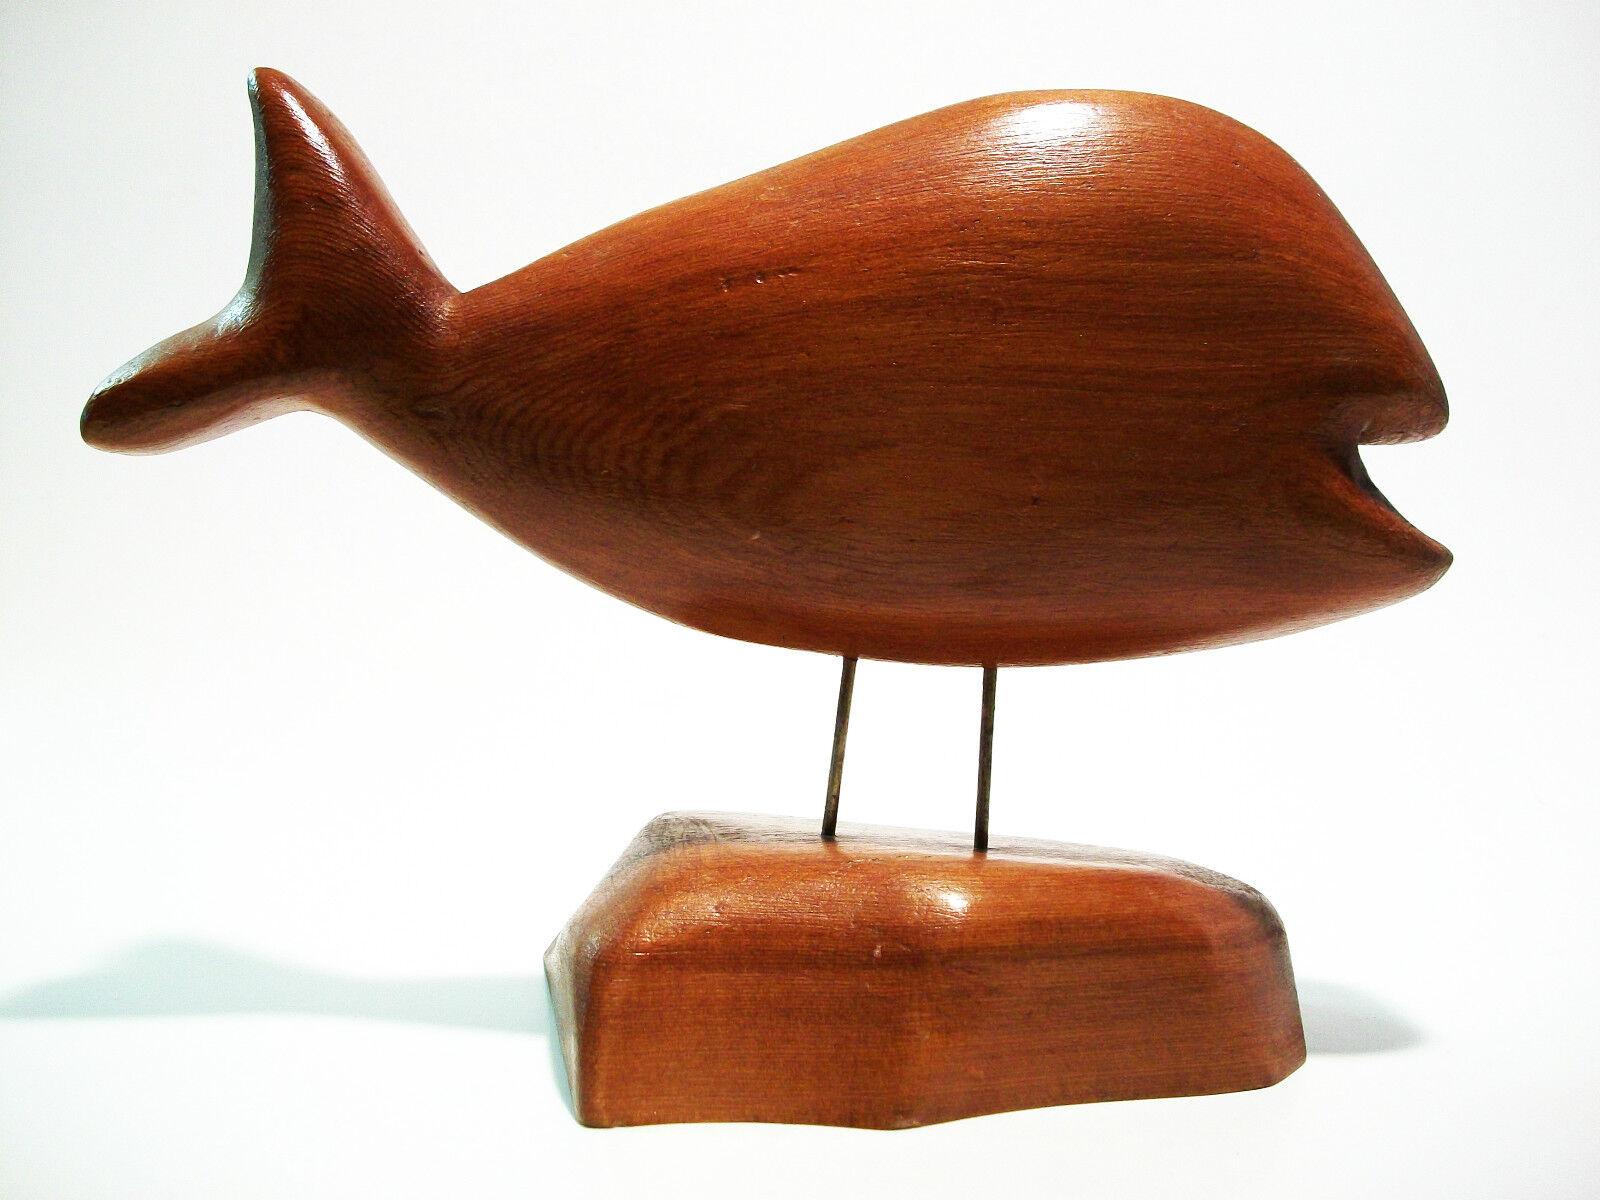 Brass MIKE MATAS - Vintage Folk Art Whale Carving on Stand - Signed - Canada - C. 1980 For Sale